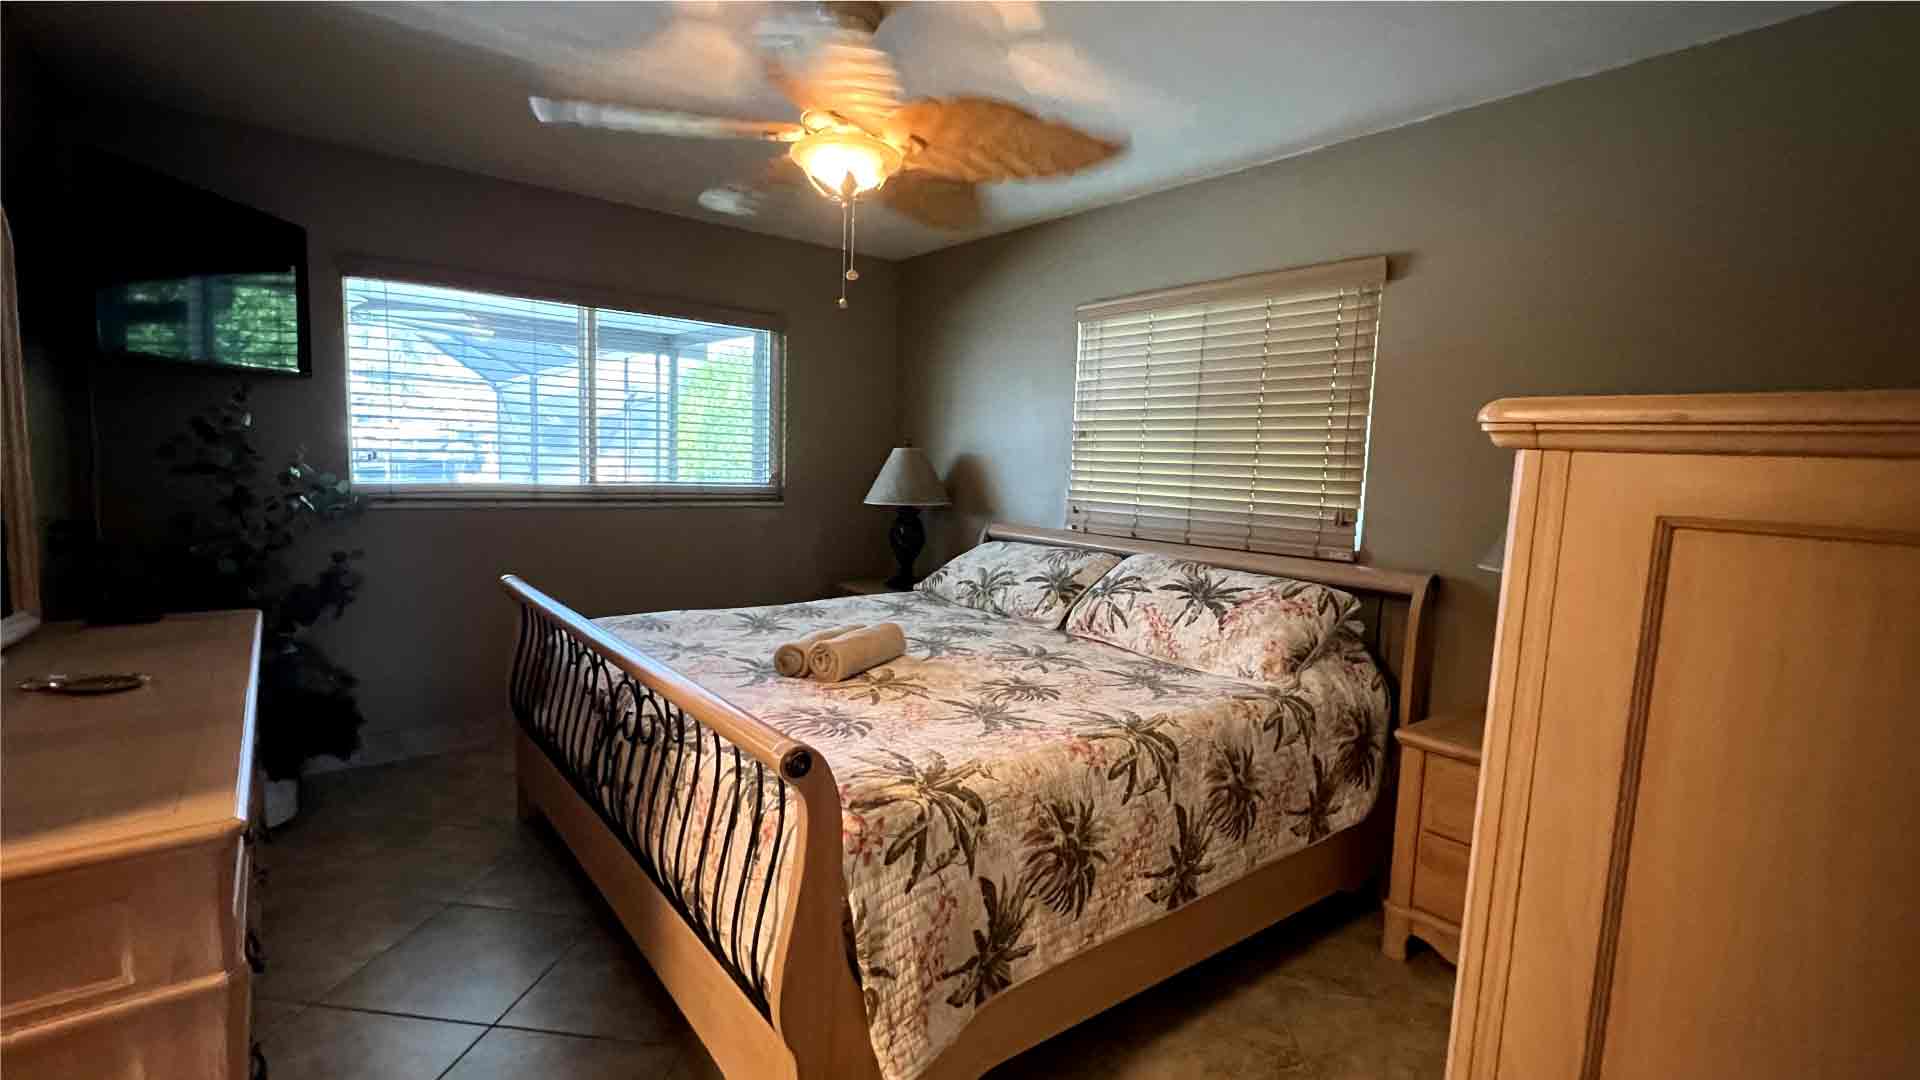 Master bedroom - Regular cleaning in Cape Coral by Goldmillio - Apr 12